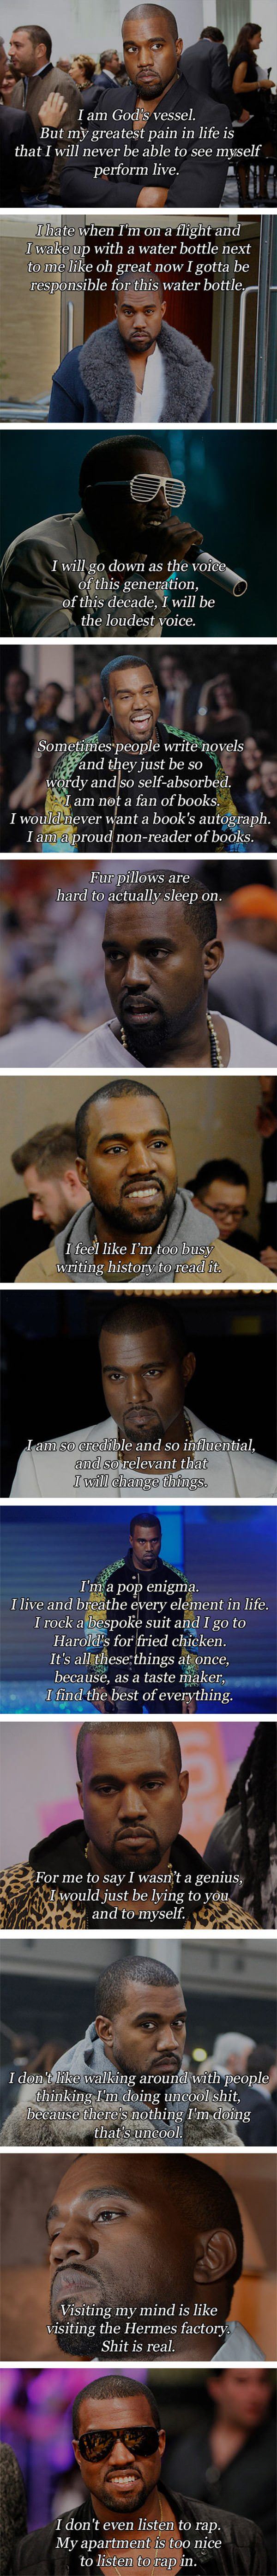 kanye quotes funny picture